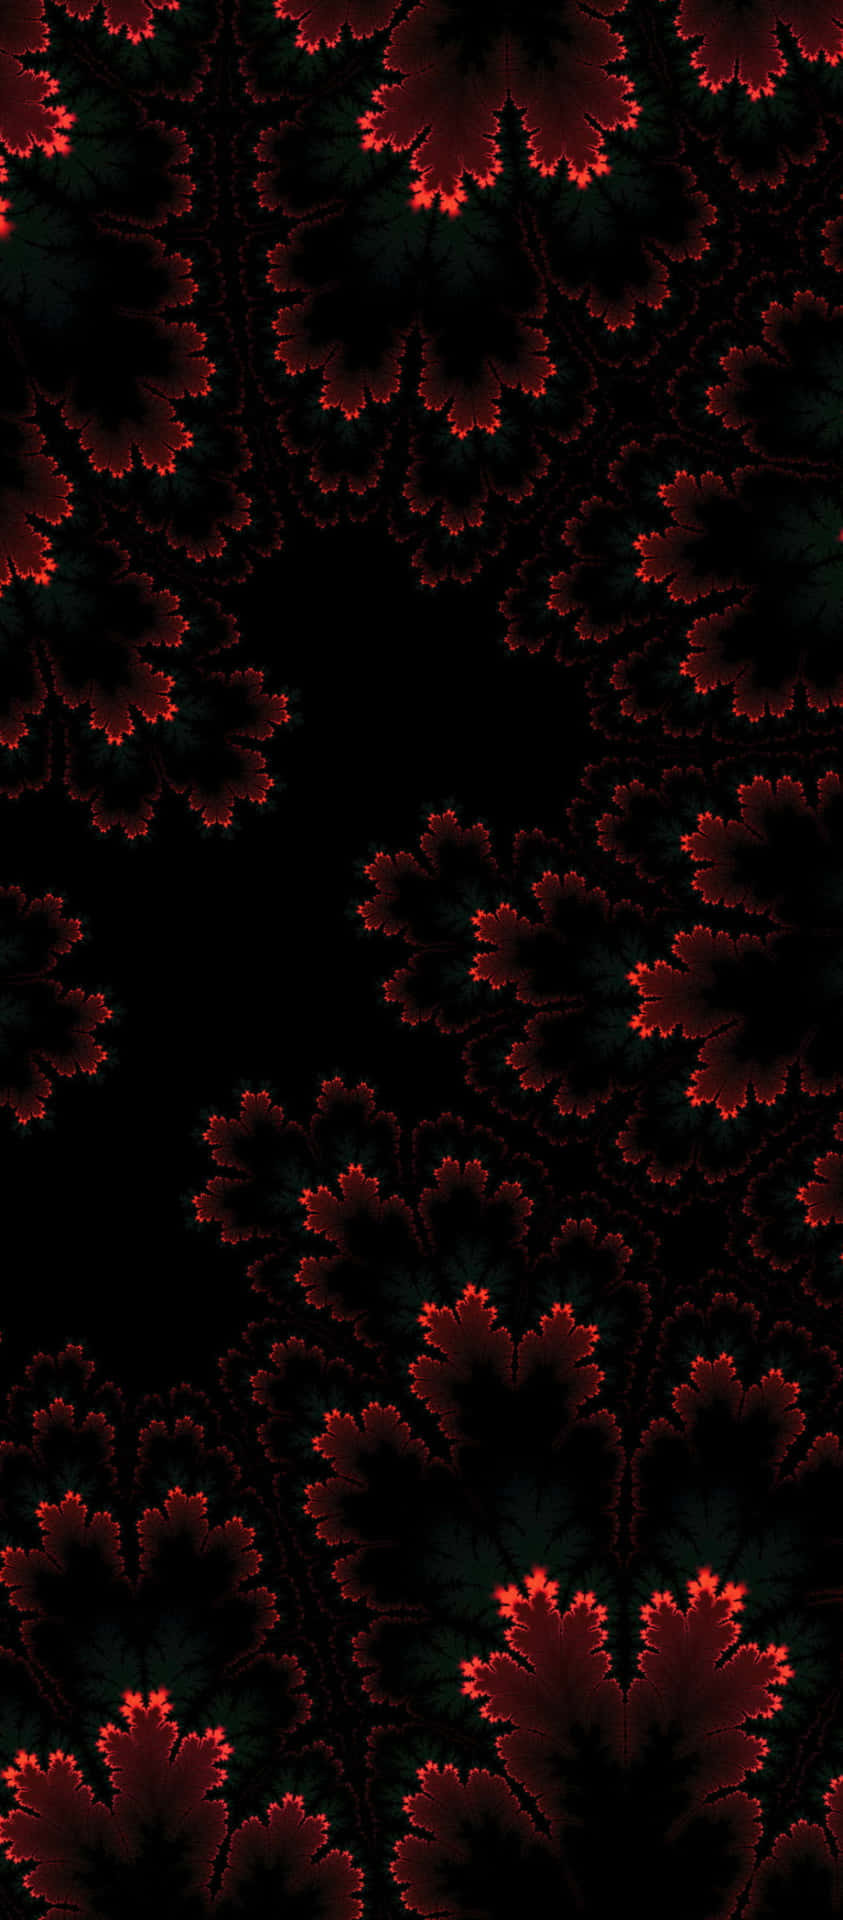 A Red And Green Abstract Pattern On A Black Background Wallpaper